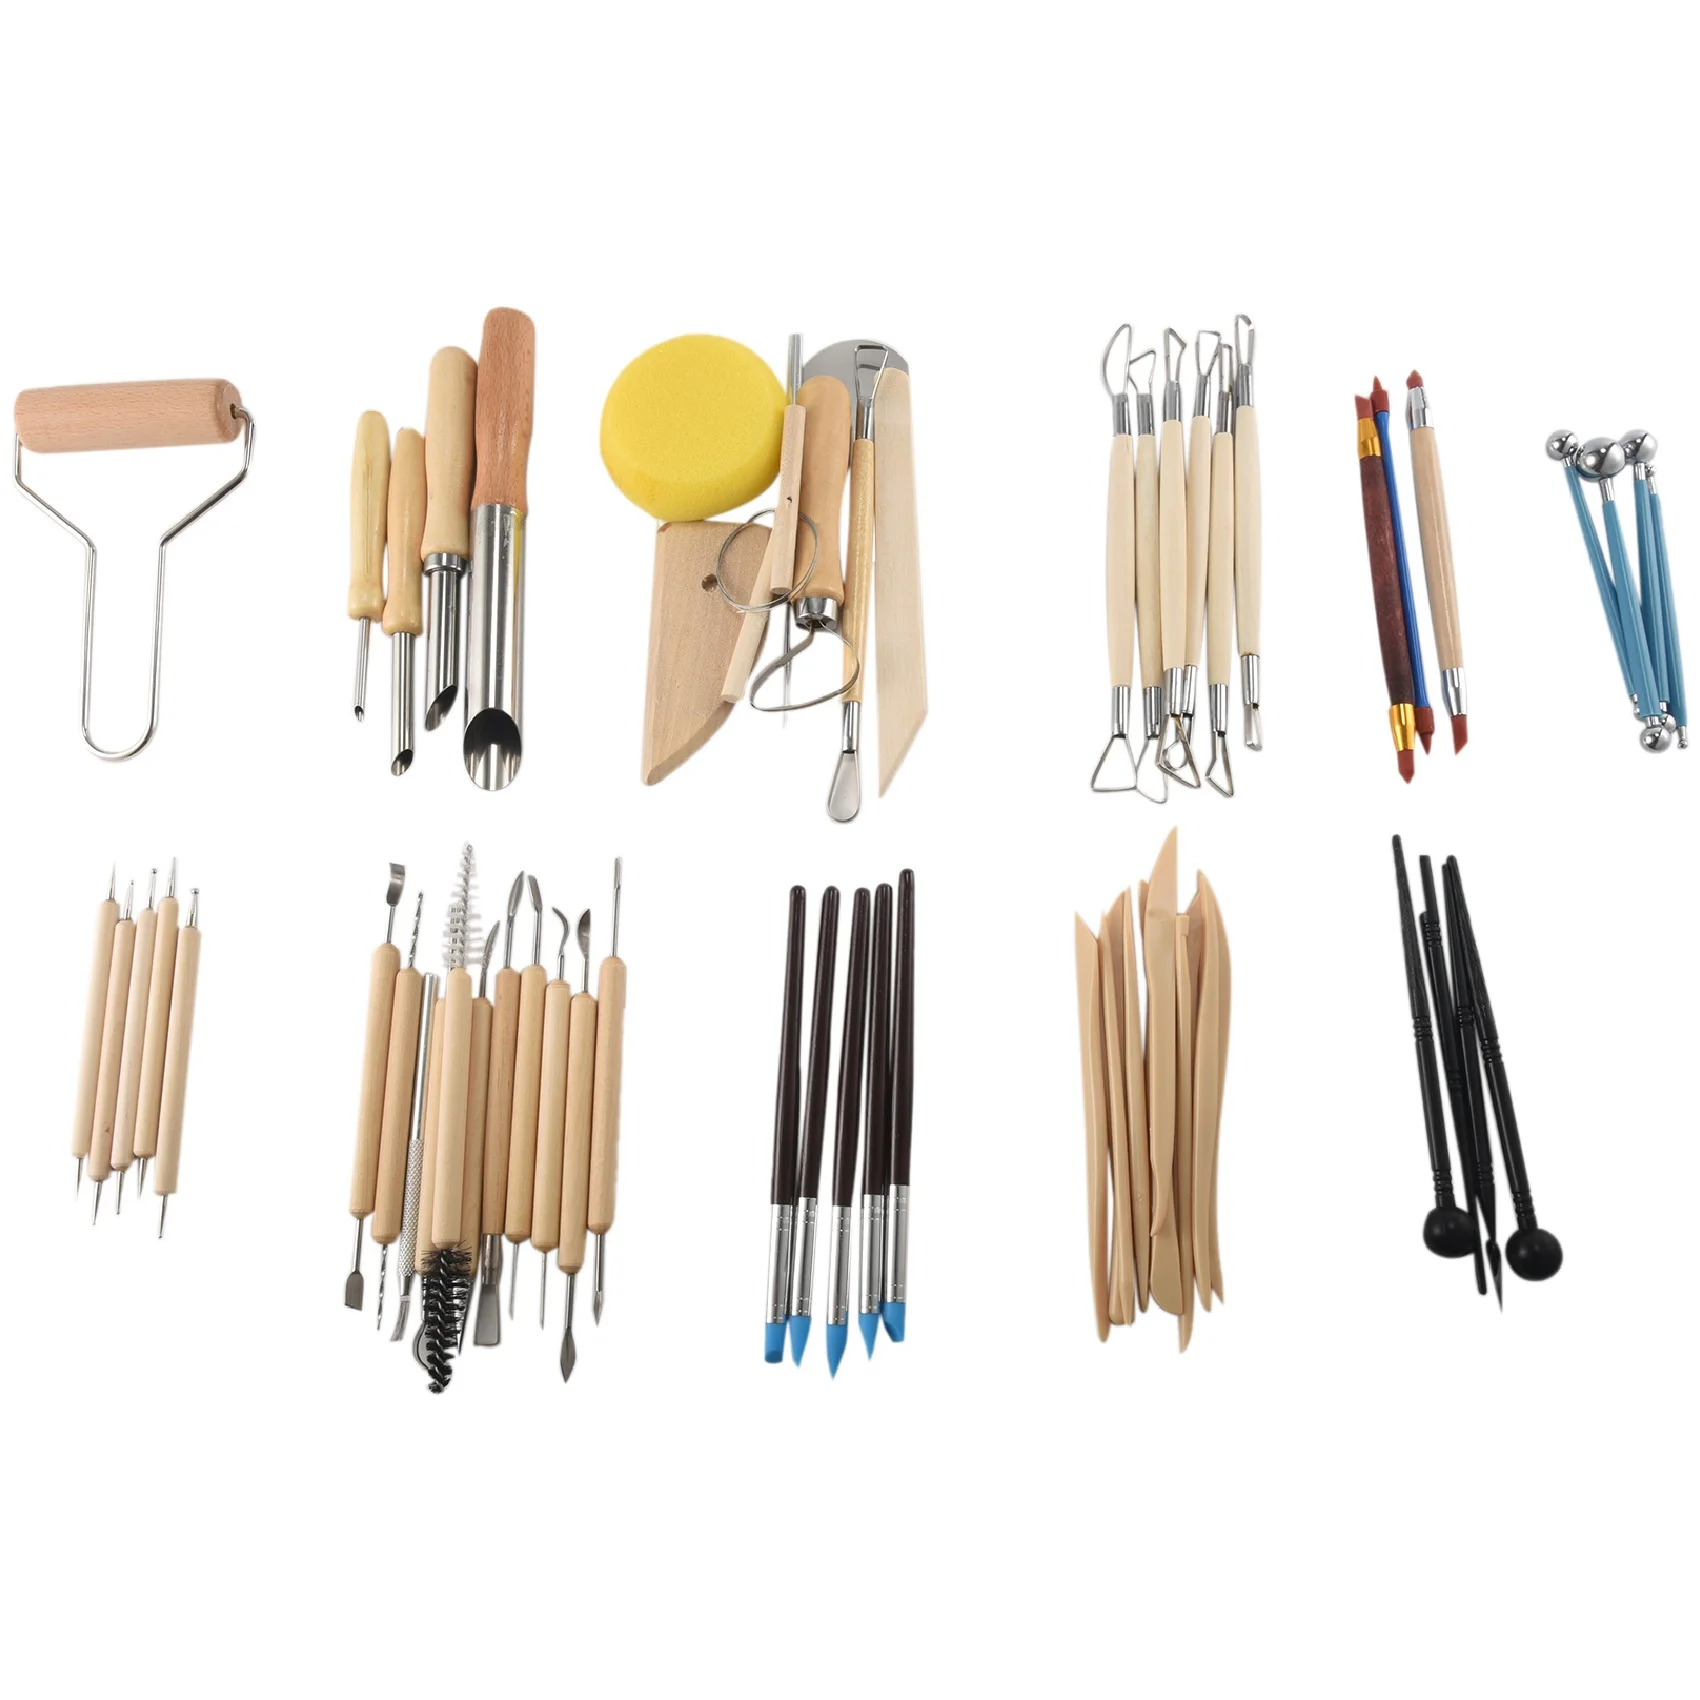 

61PCS Ceramic Clay Tools Set Polymer Clay Tools Pottery Tools Set Wooden Pottery Sculpting Clay Cleaning Tool Set